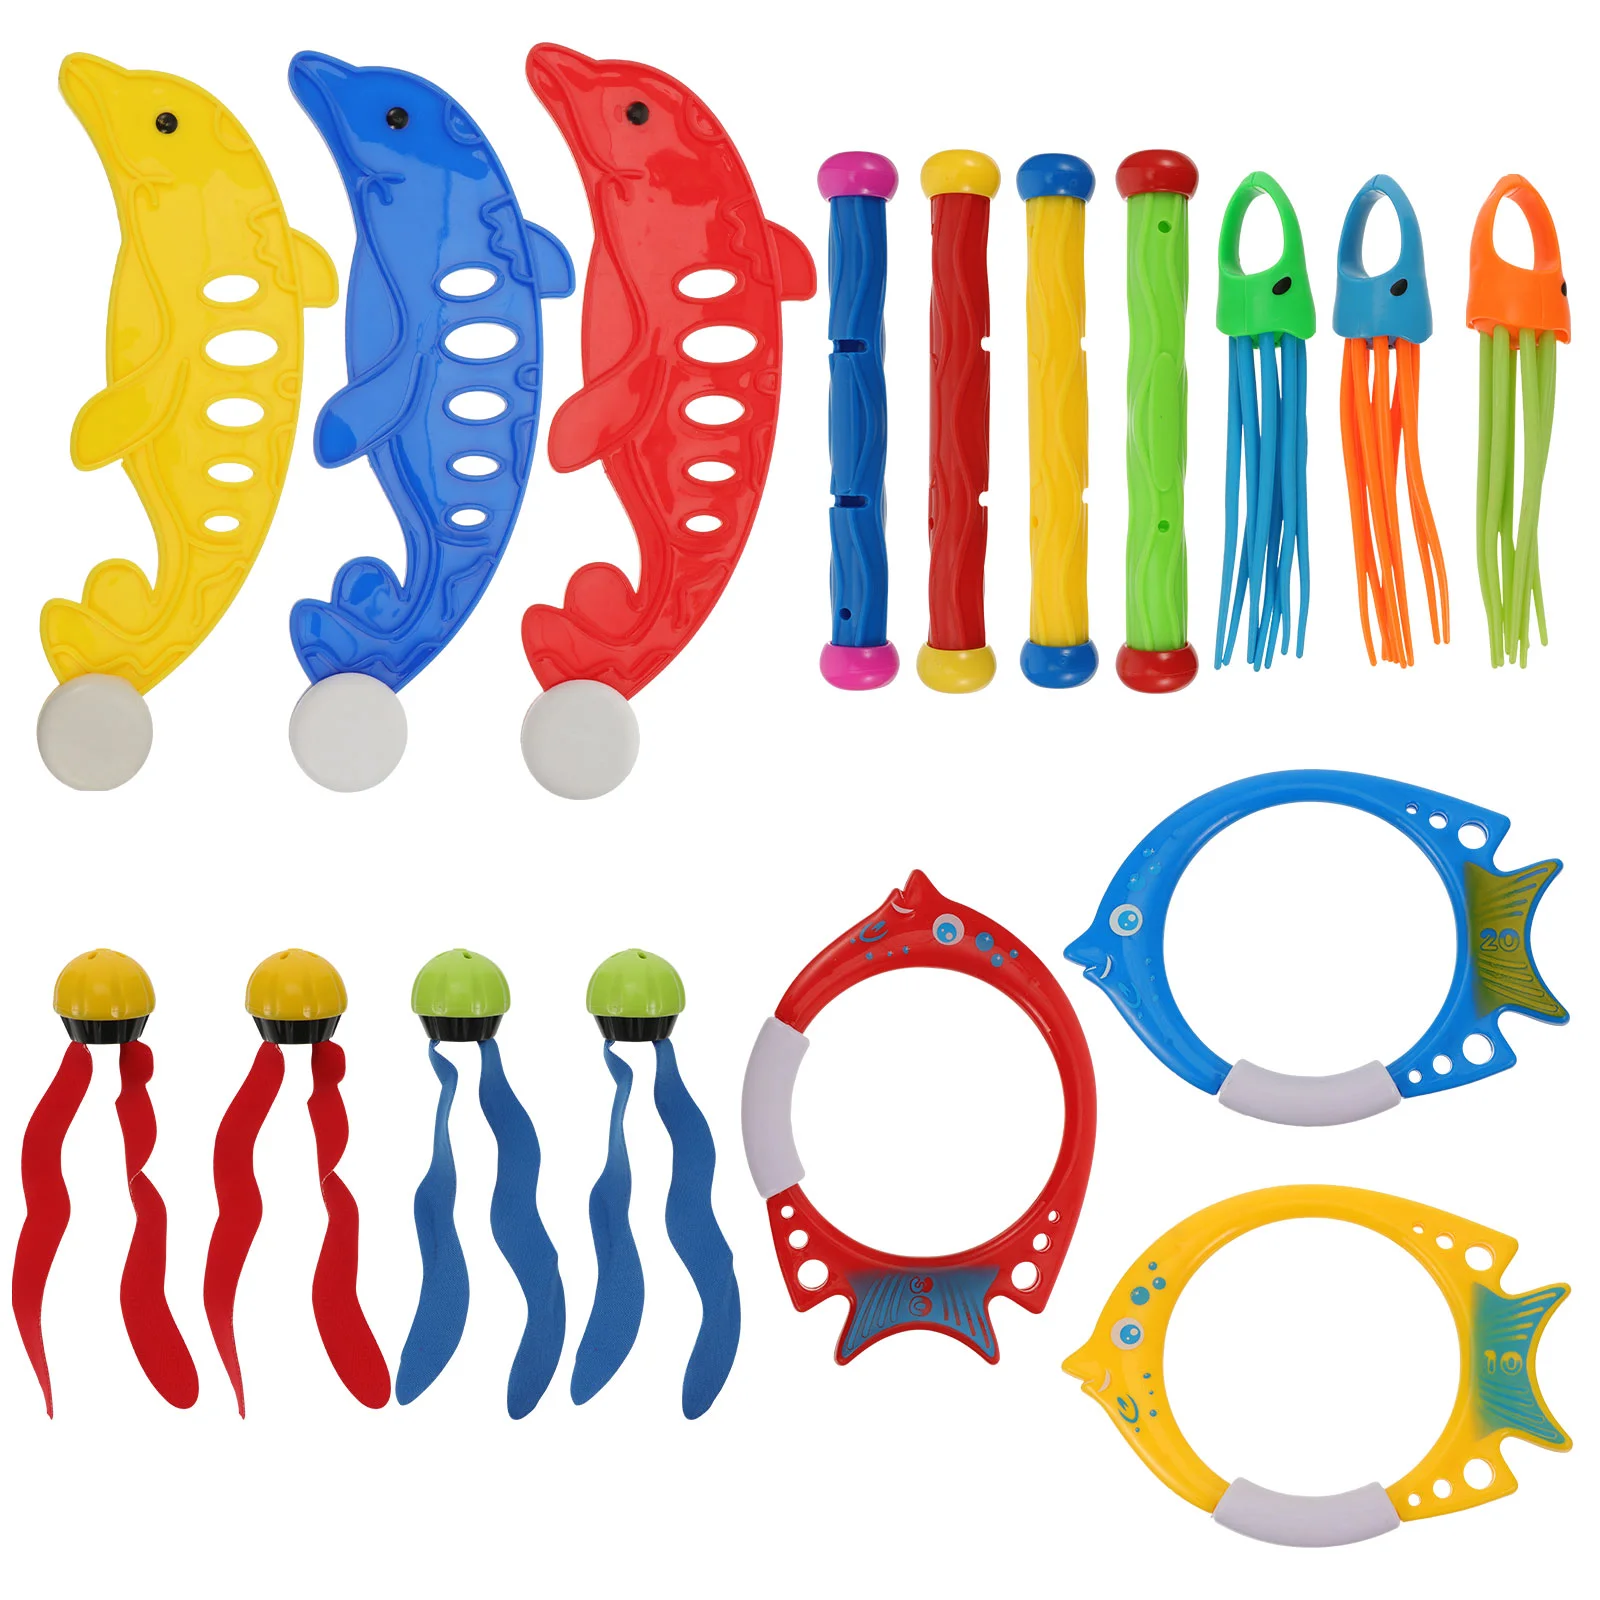 

17pcs Kids Summer Swimming Diving Toys Underwater Swim Pool Diving Toys Sinking Diving Toys for Home Ourdoor ( Mixed Color )